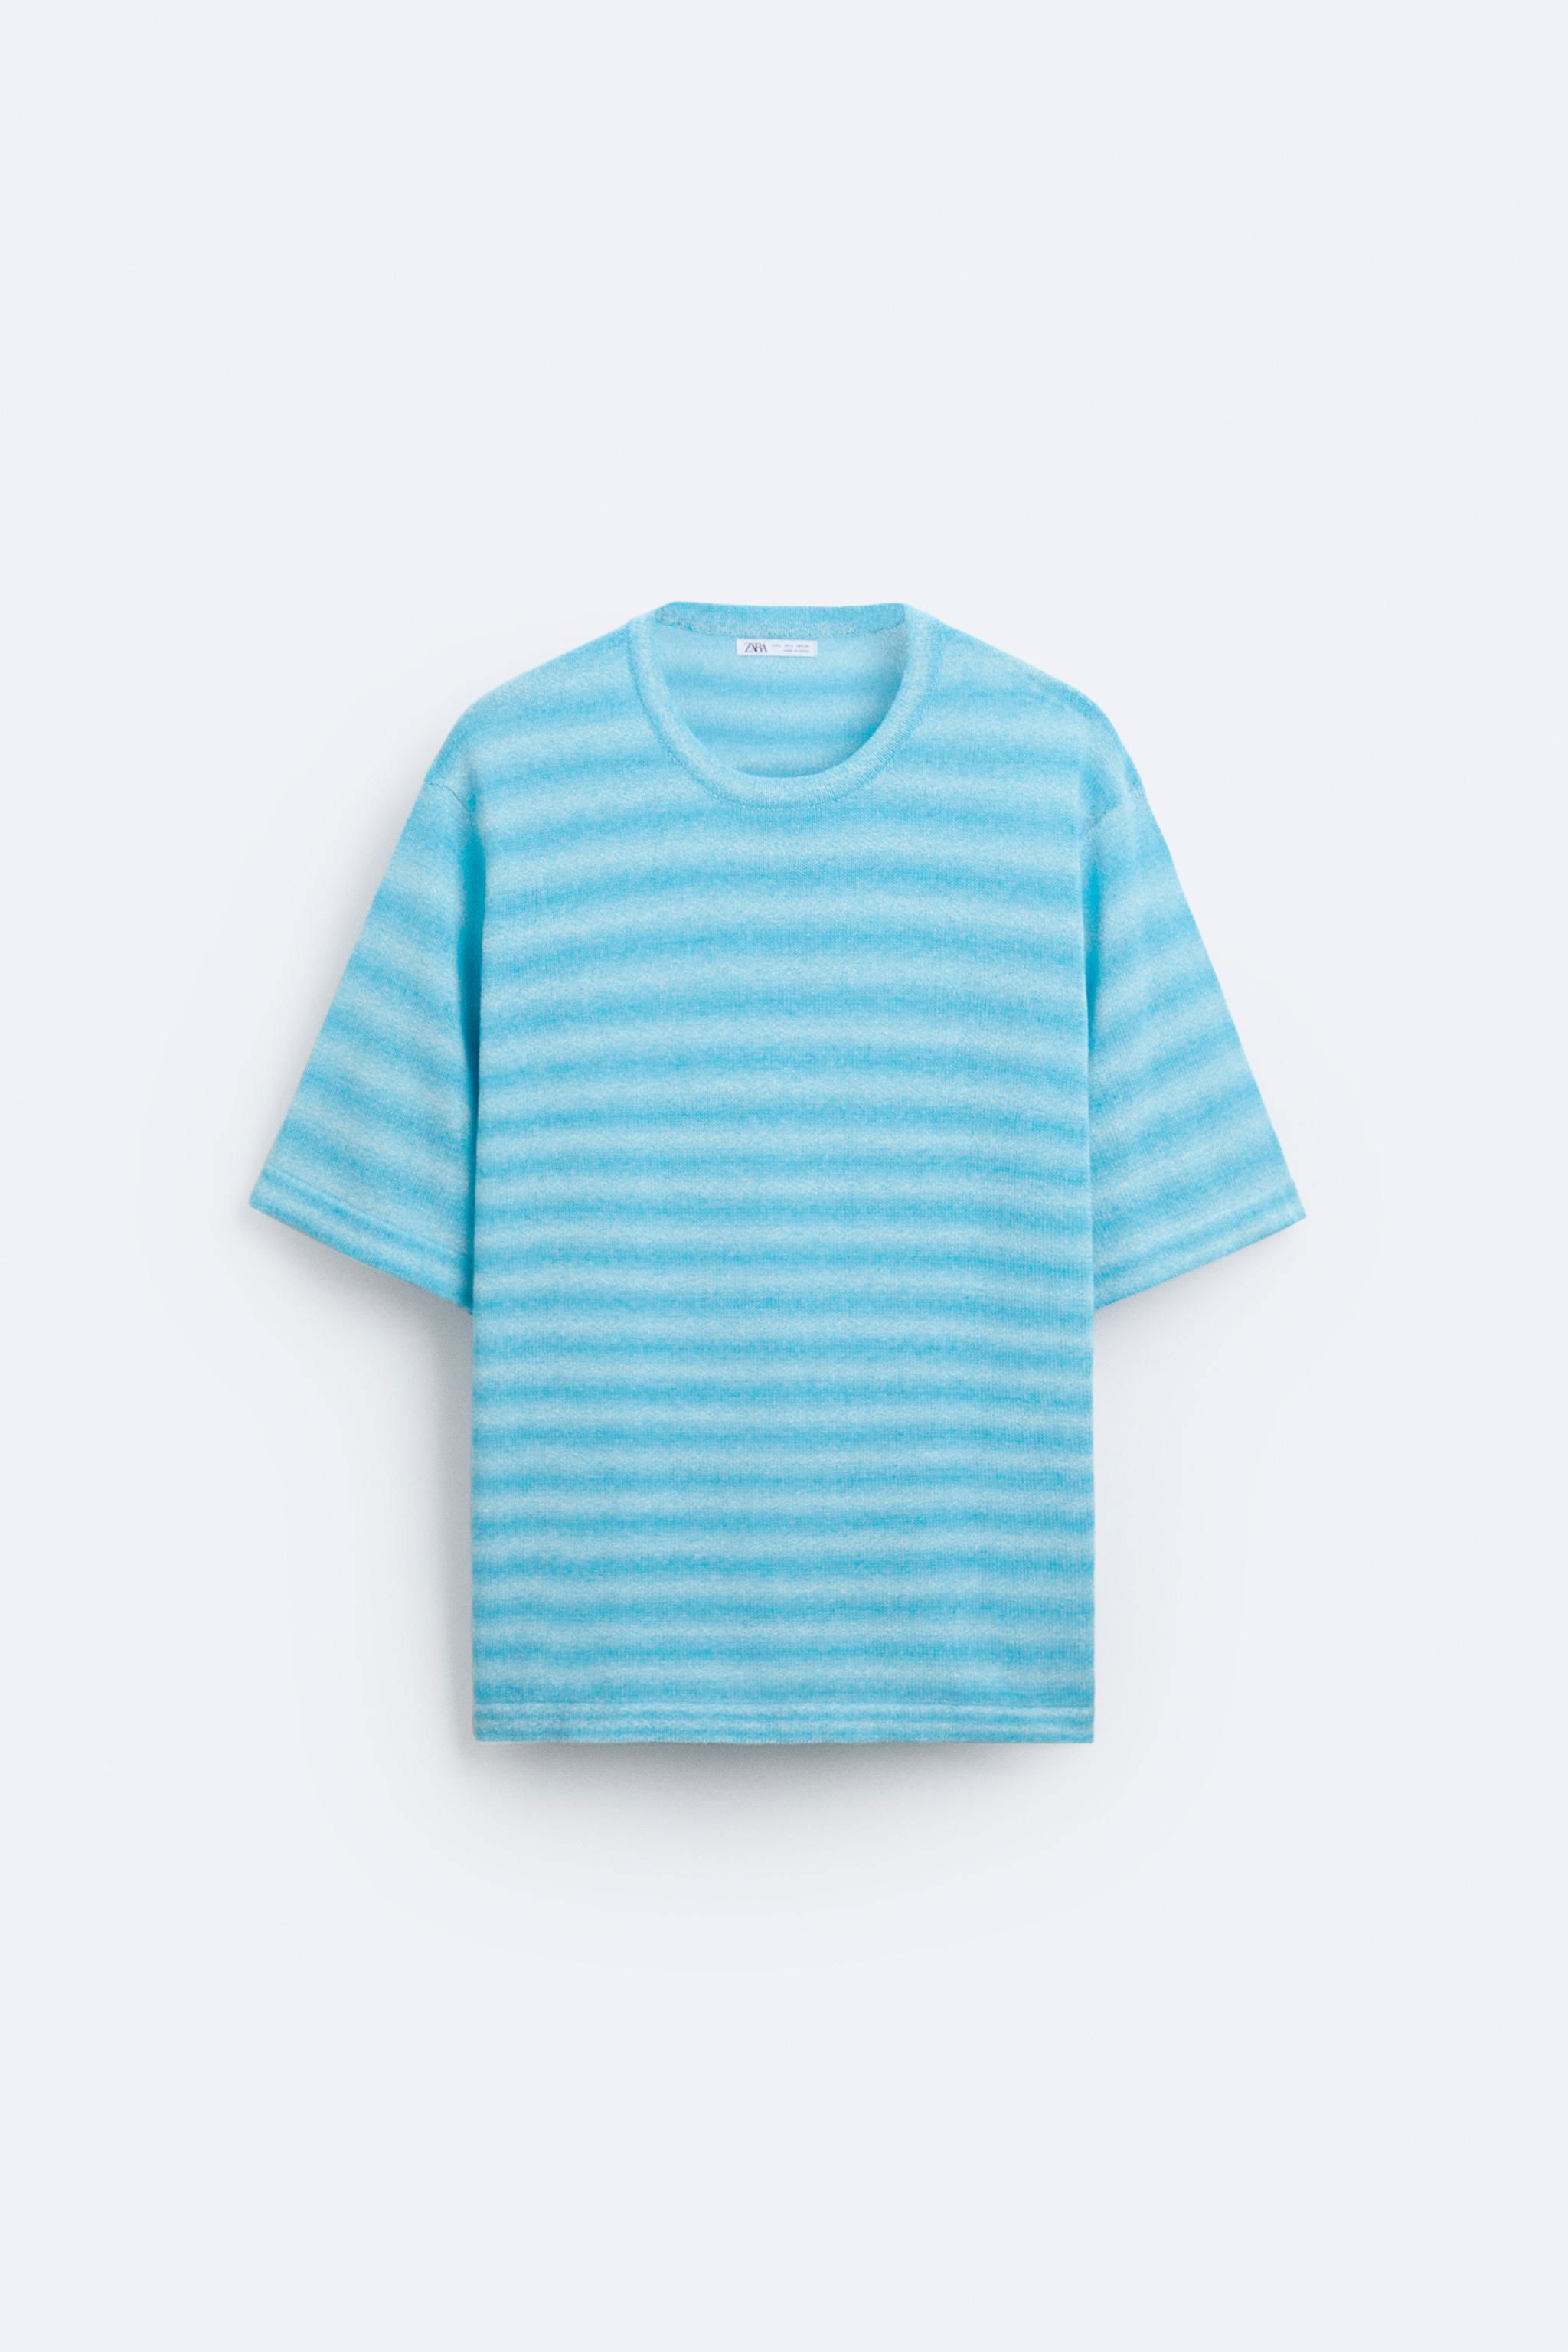 OMBRÉ PRINTED KNITTED SHIRT by ZARA